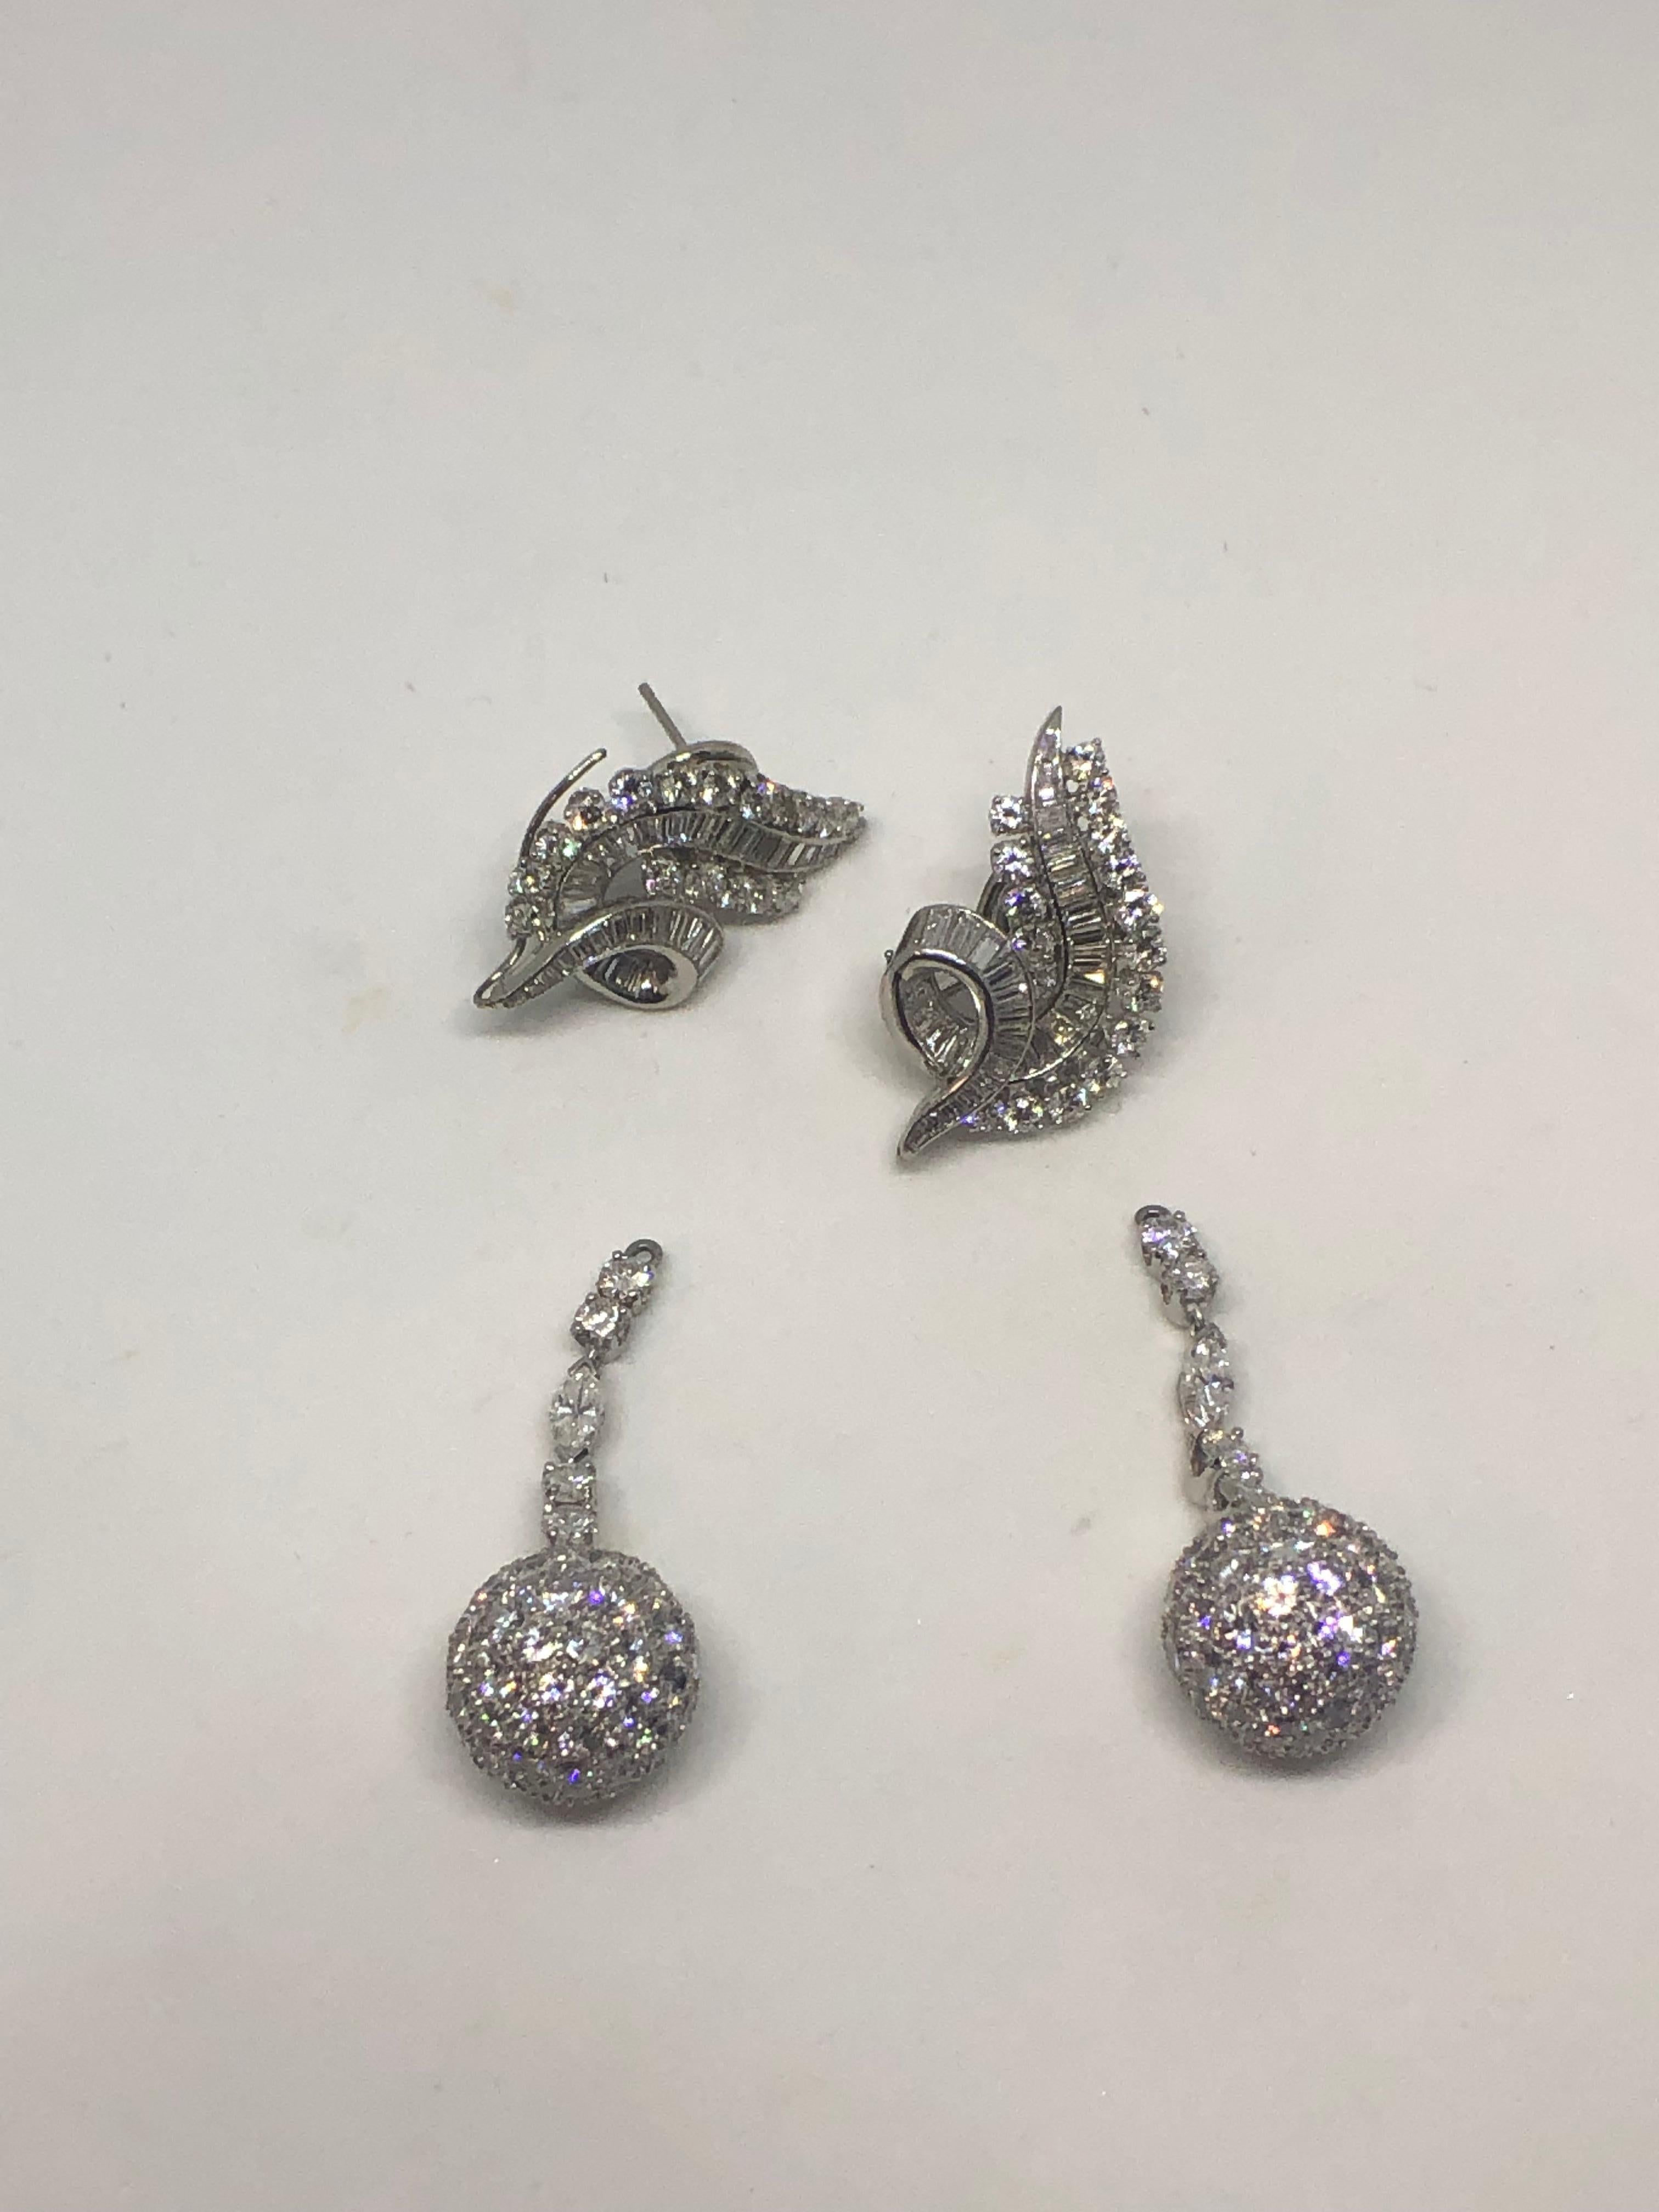 Vintage Diamond Drop Earrings in Platinum In Good Condition For Sale In Mansfield, OH